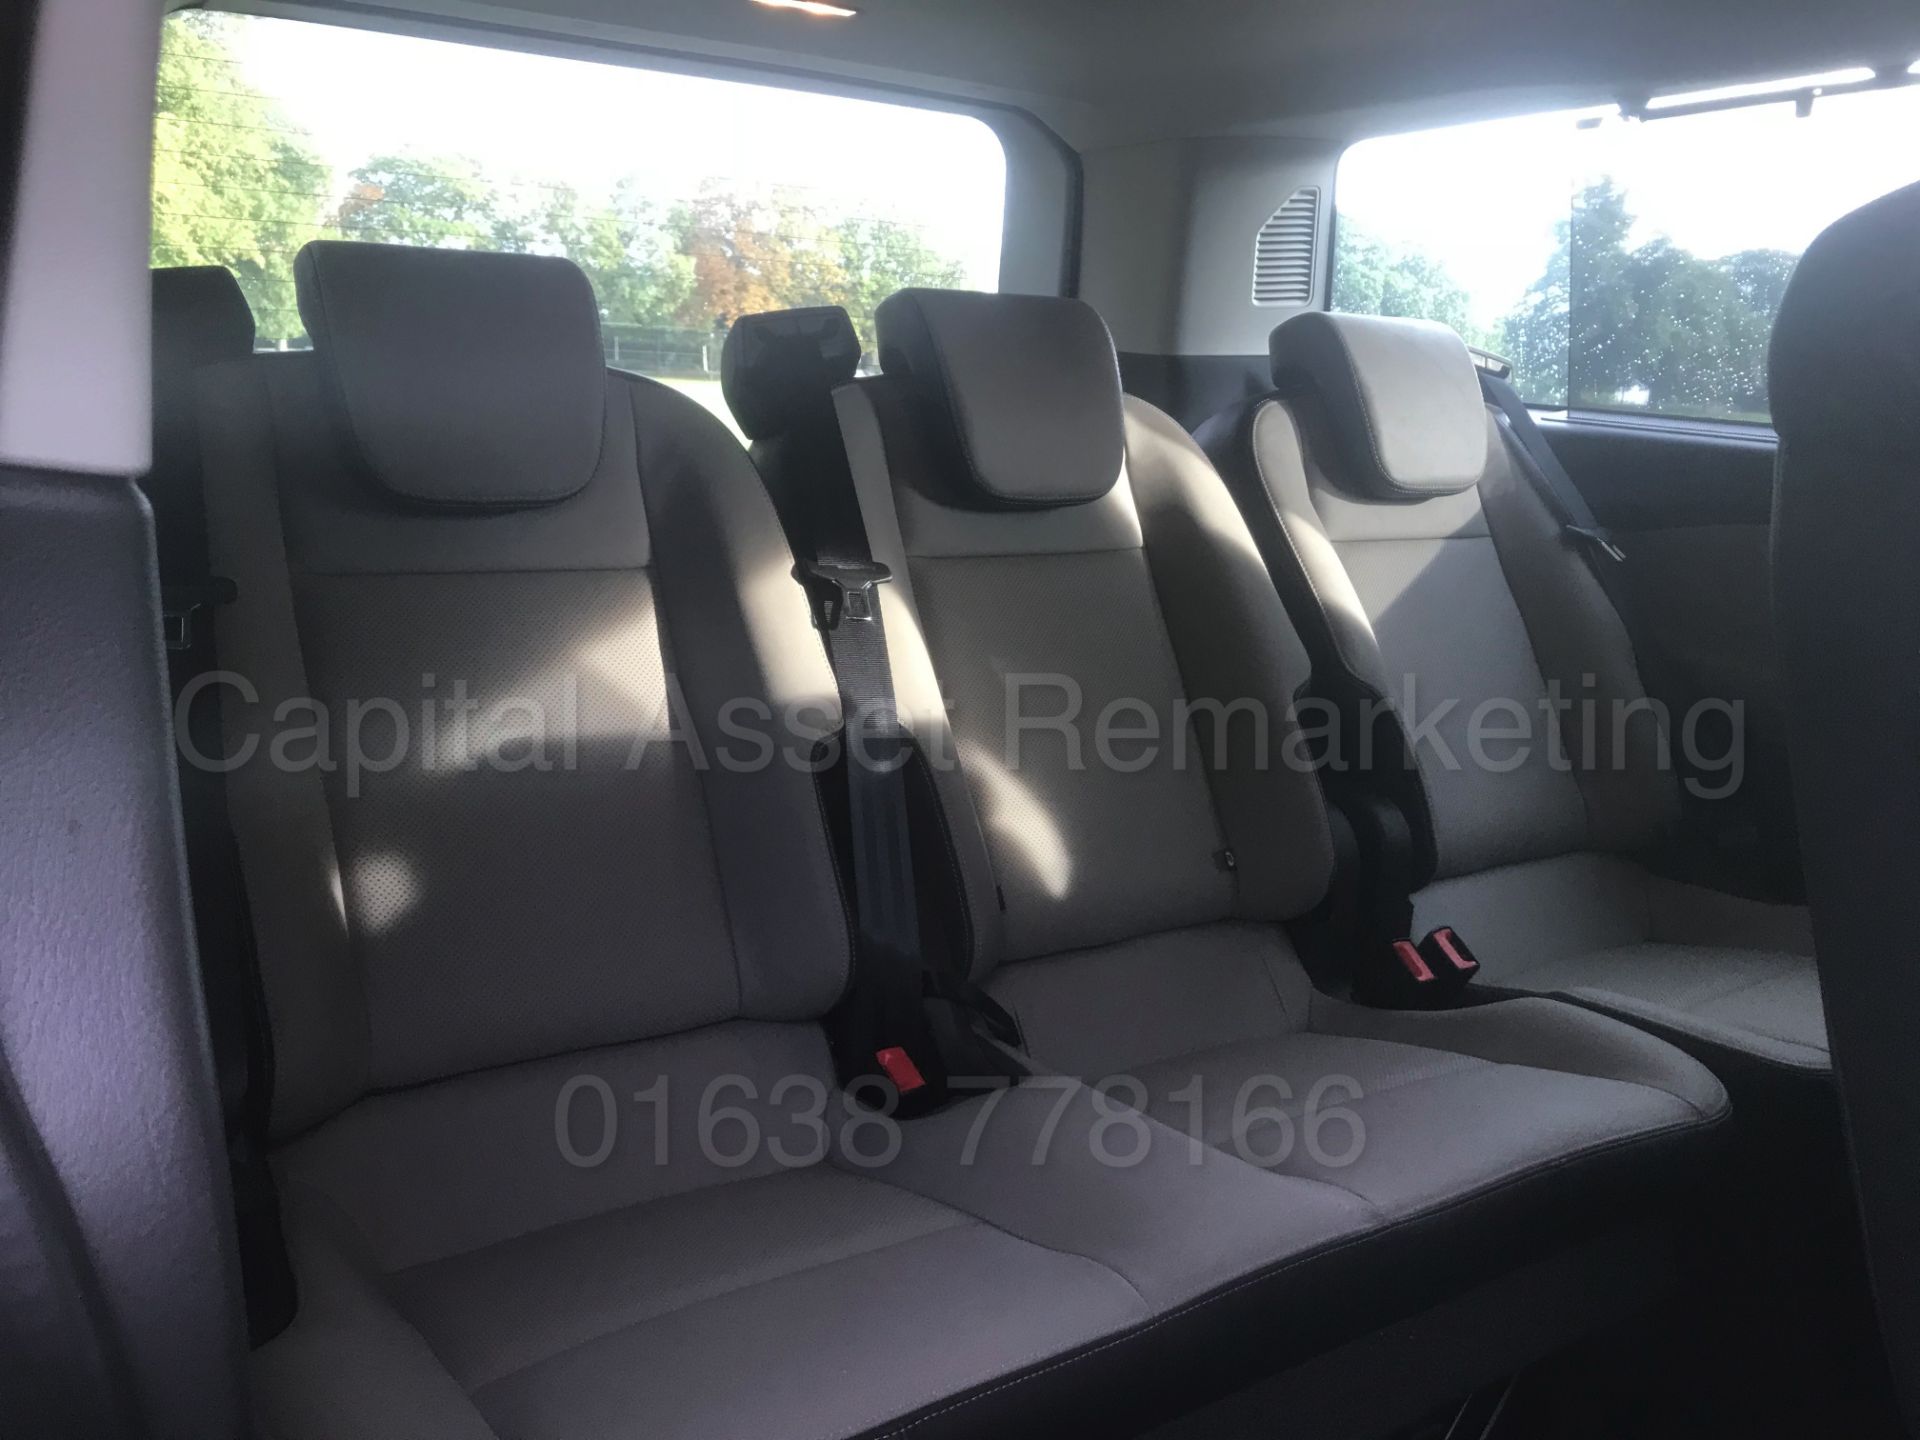 FORD TRANSIT 'TOURNEO' *TITANIUM EDITION* (2018) *9 SEATER MPV* '2.0 TDCI - 6 SPEED' *LOW MILES* - Image 37 of 62